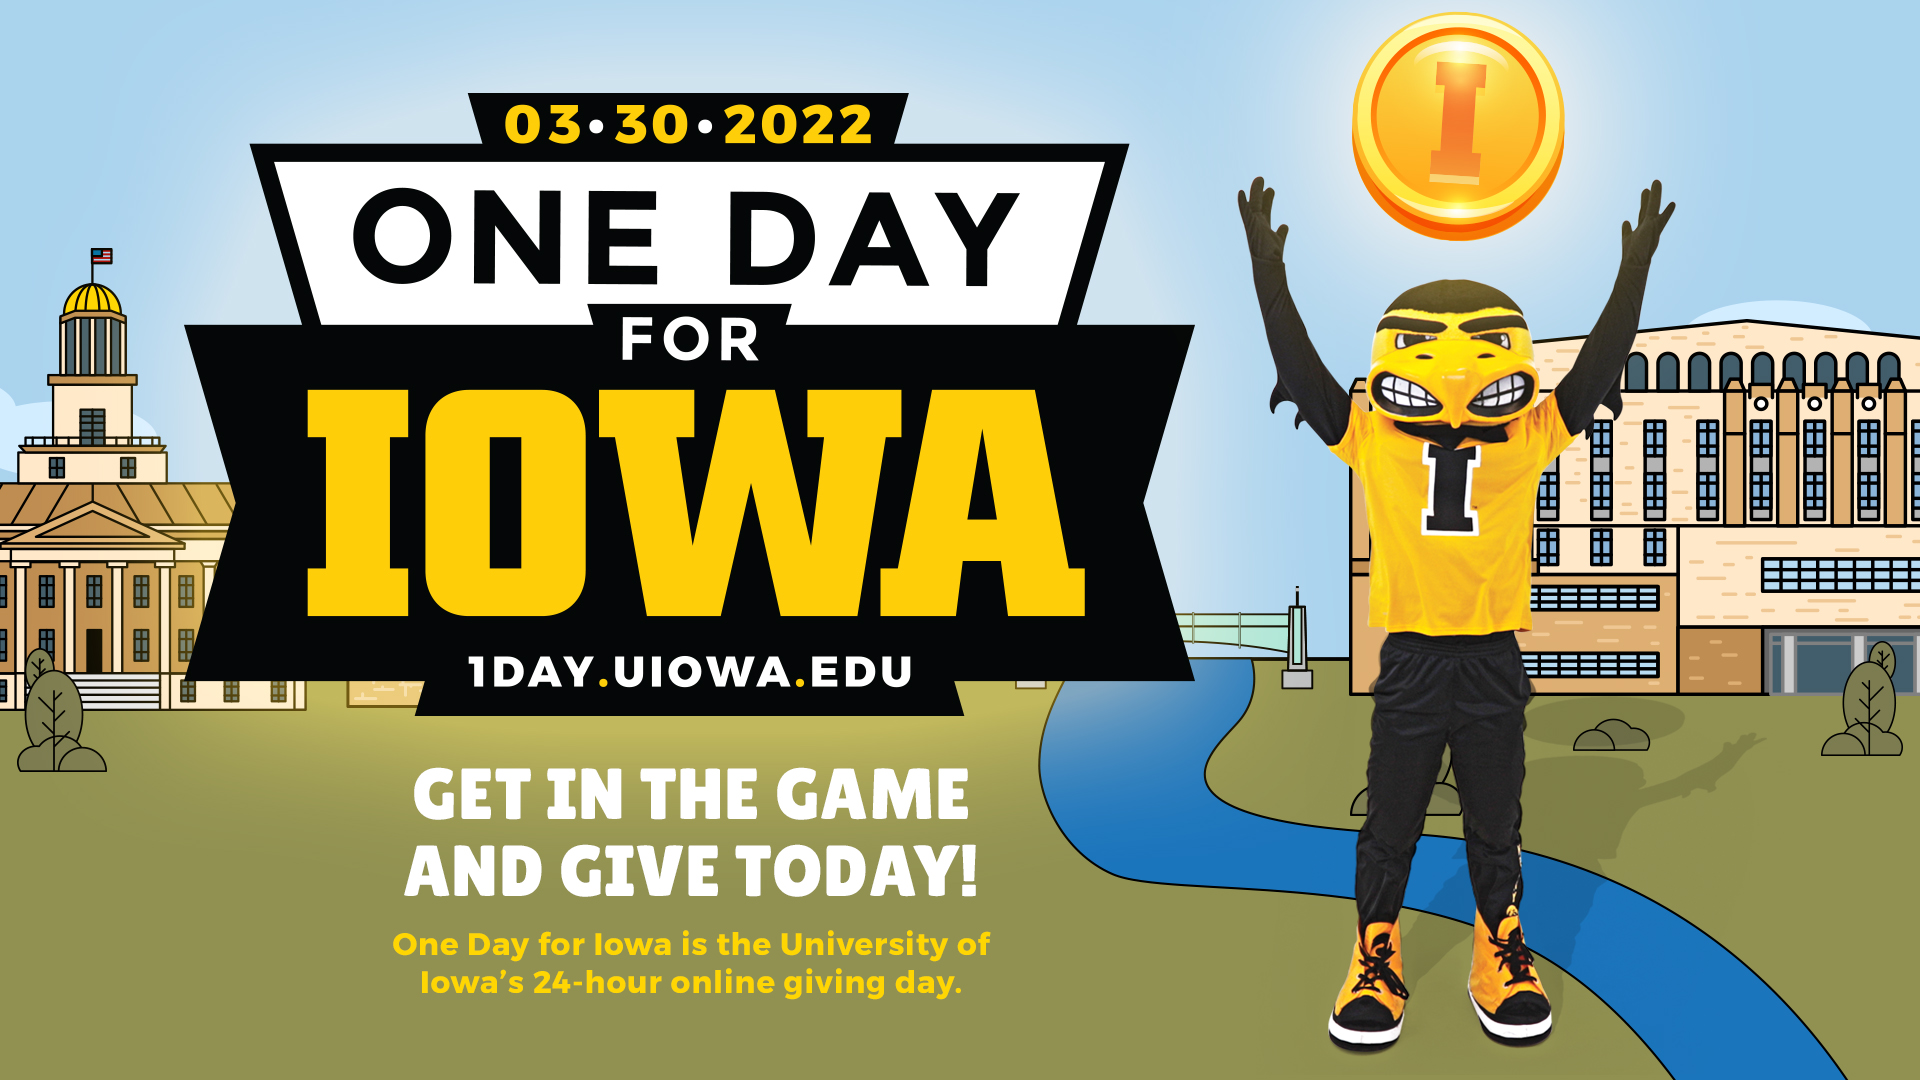 03-30-2022 One Day for Iowa 1day.uiowa.edu get in the game and give today! One Day for Iowa is the university's 24-hour online giving day.